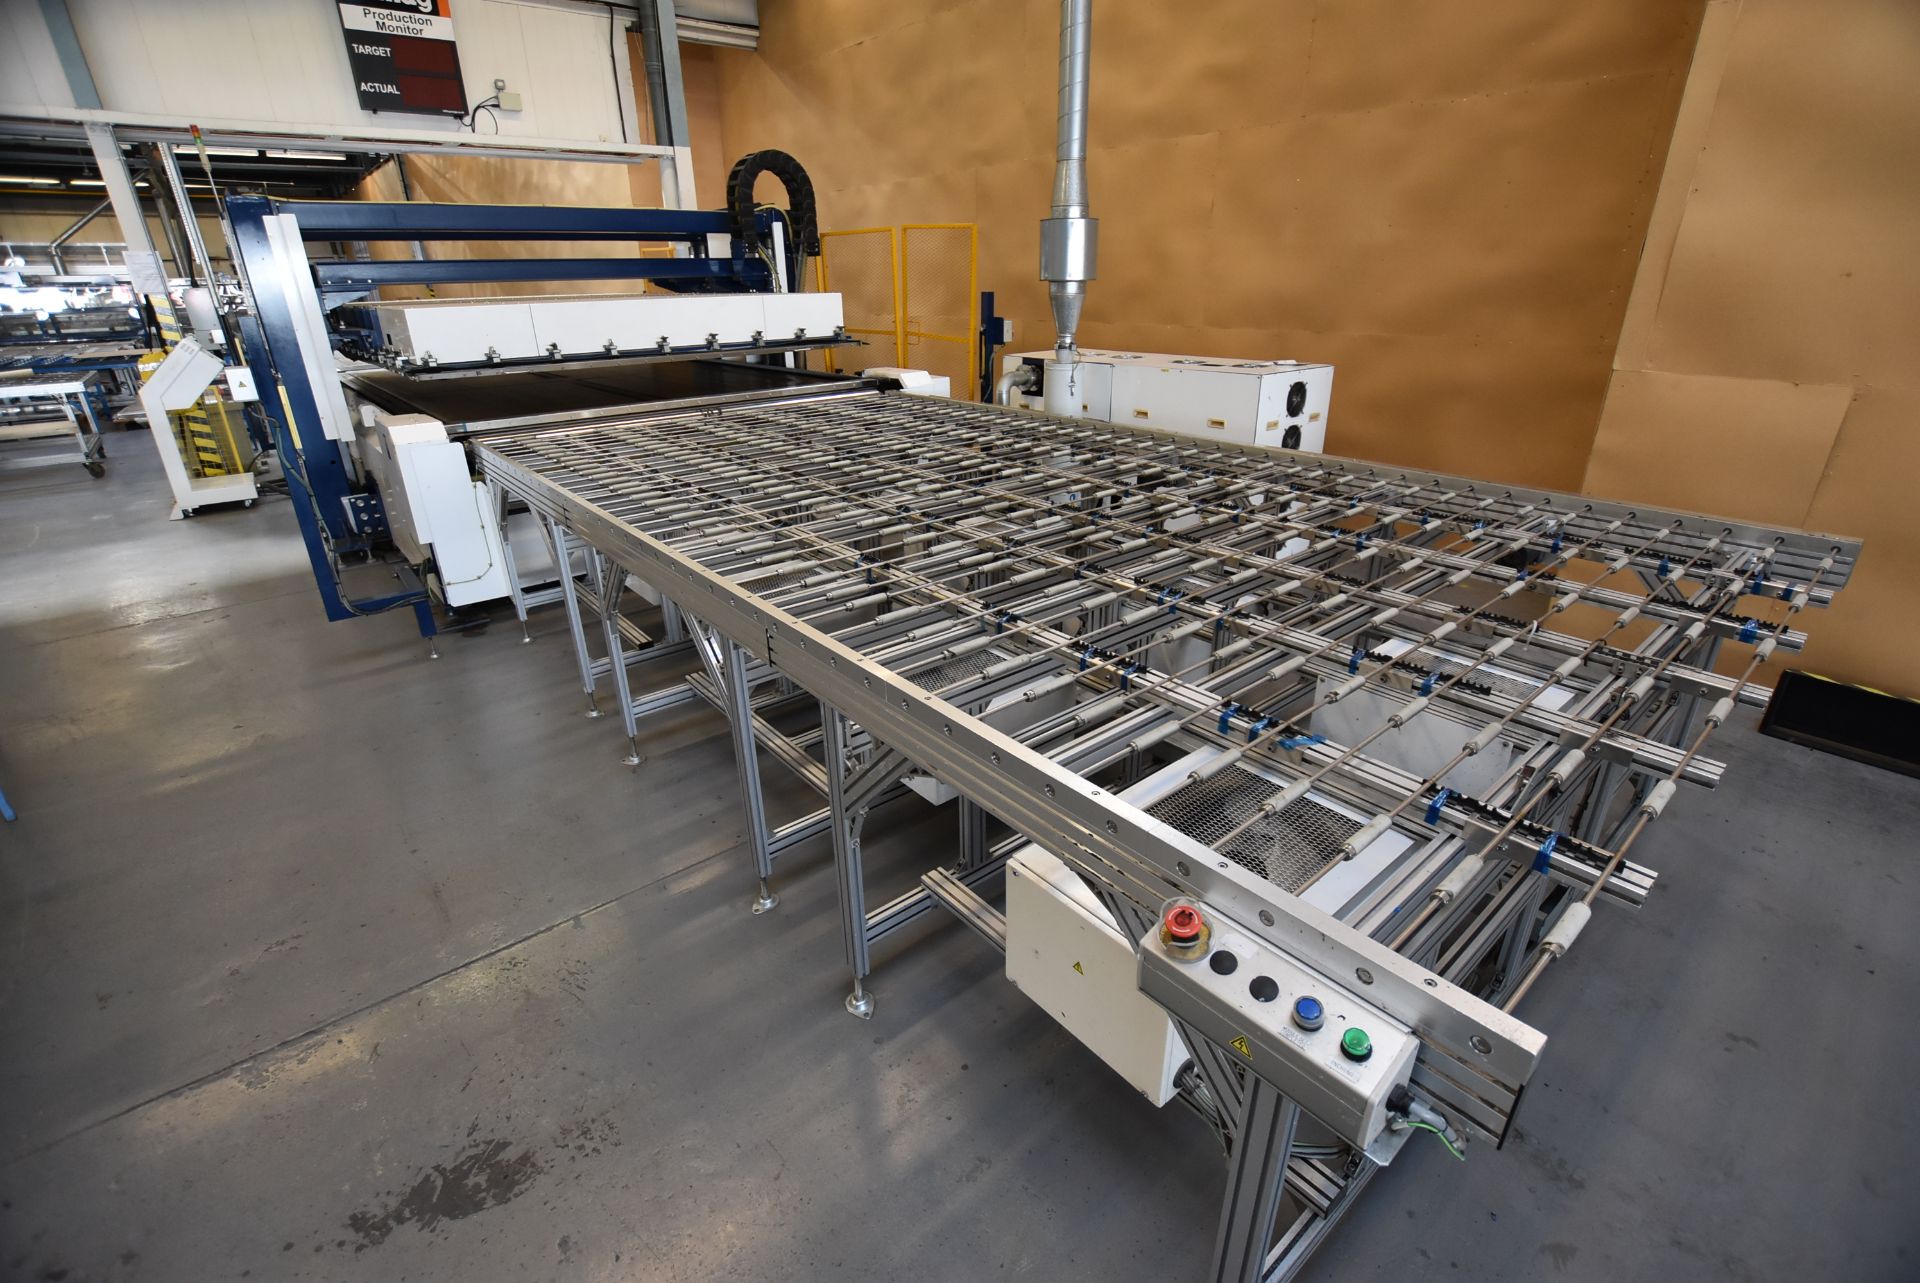 NPC LM-SA 220x400S PHOTOVOLTAIC MODULE LAMINATOR, serial no. 15002573-01, year of manufacture - Image 5 of 8